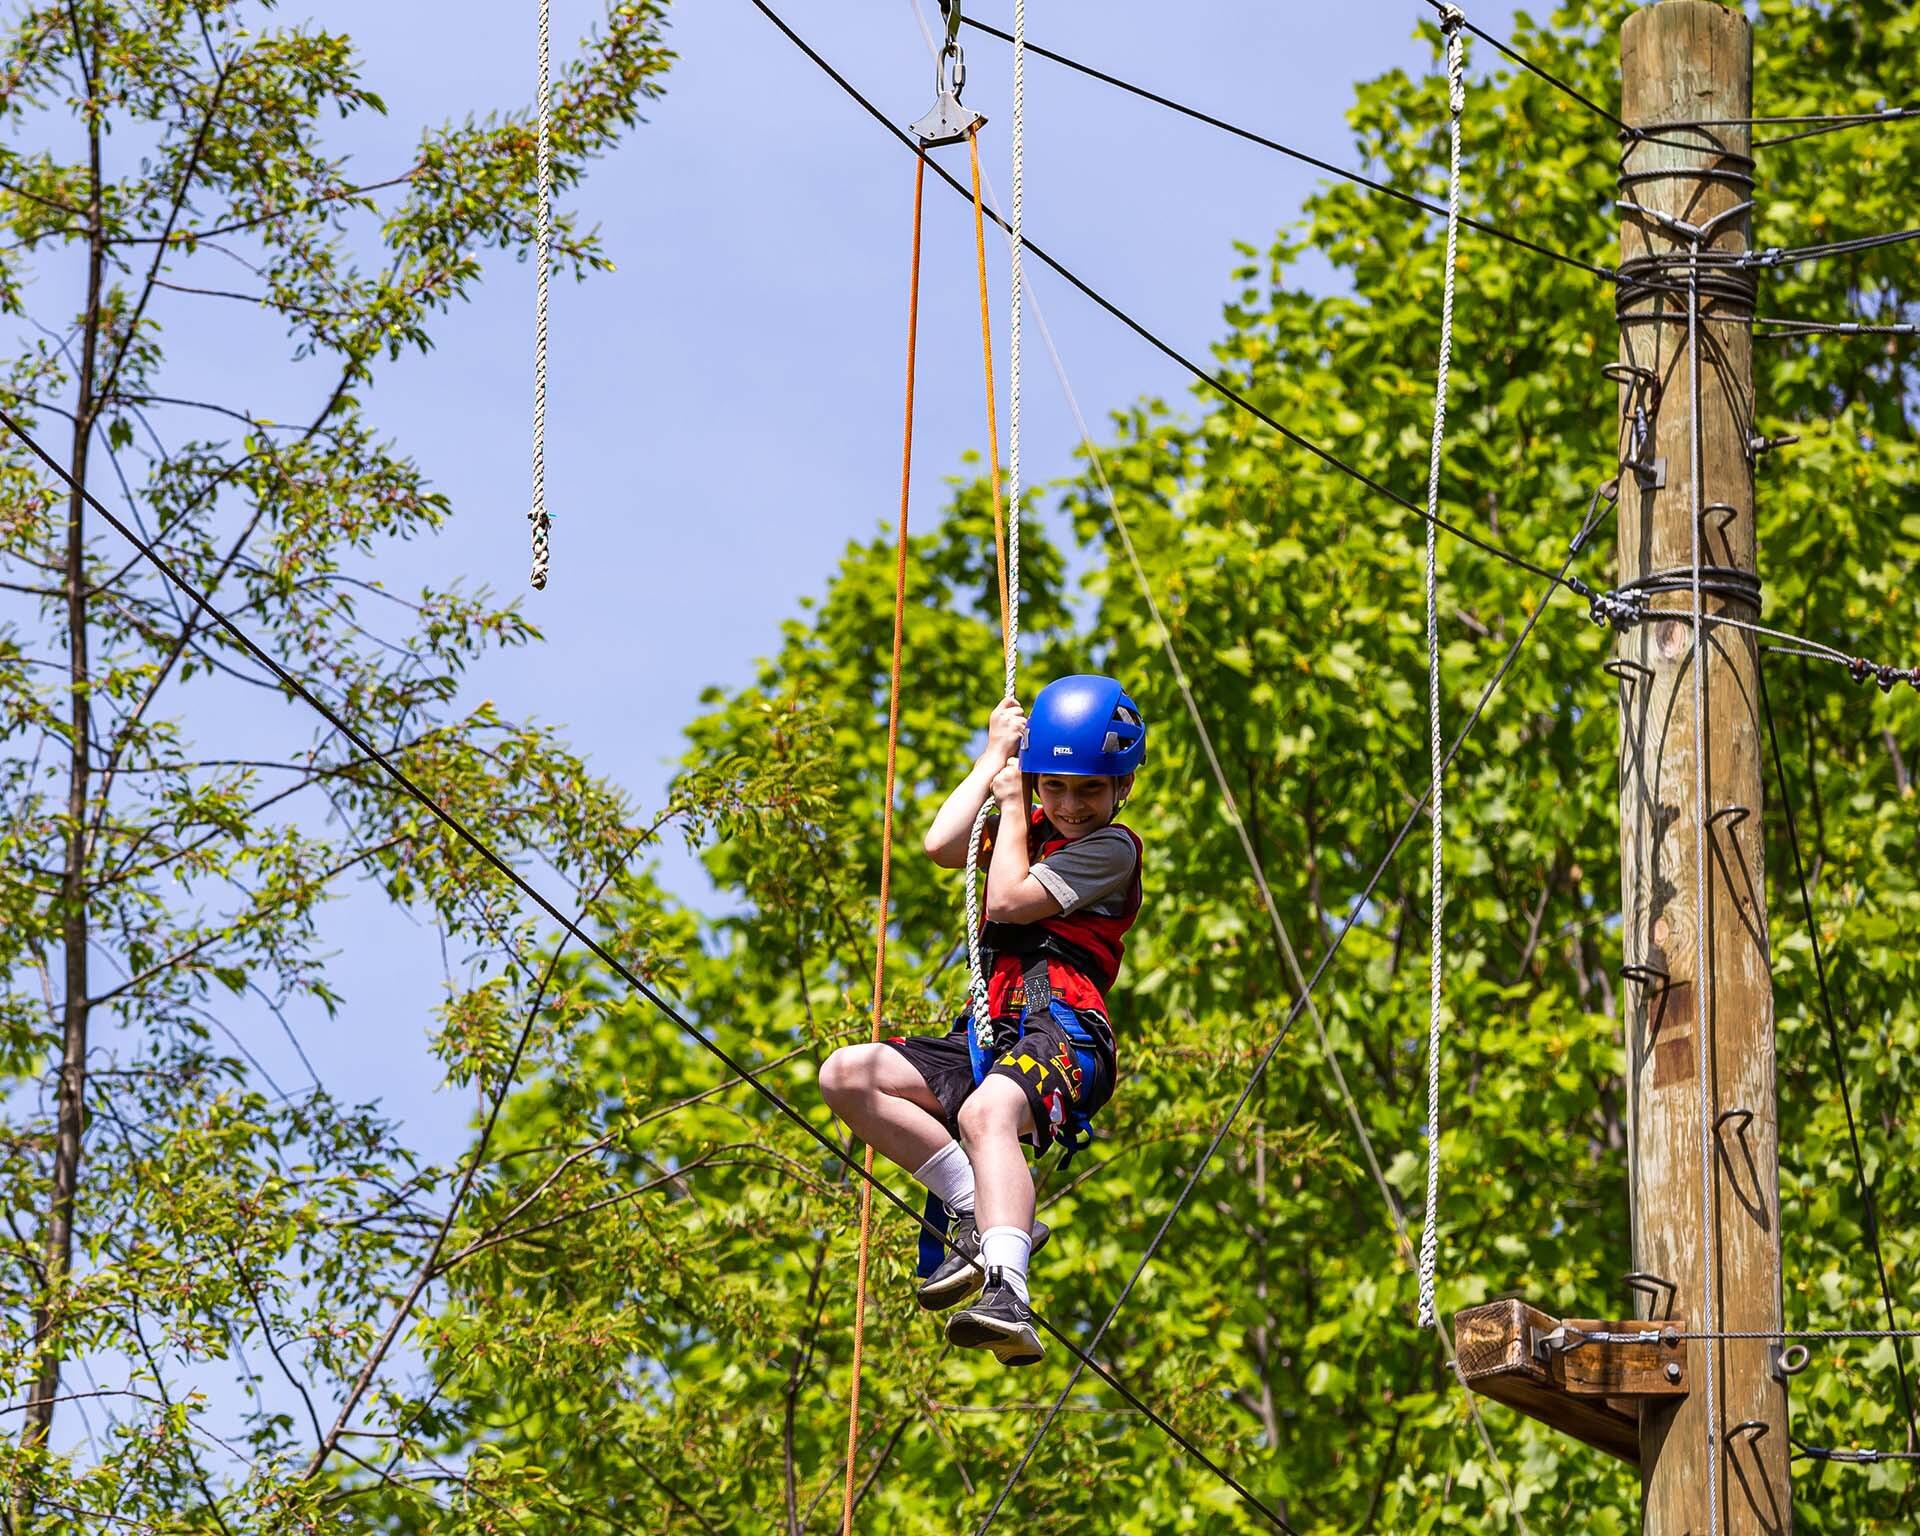 A child in a blue helmet slides across the zipline at the Eppley Recreation Center Challenge Course on campus.